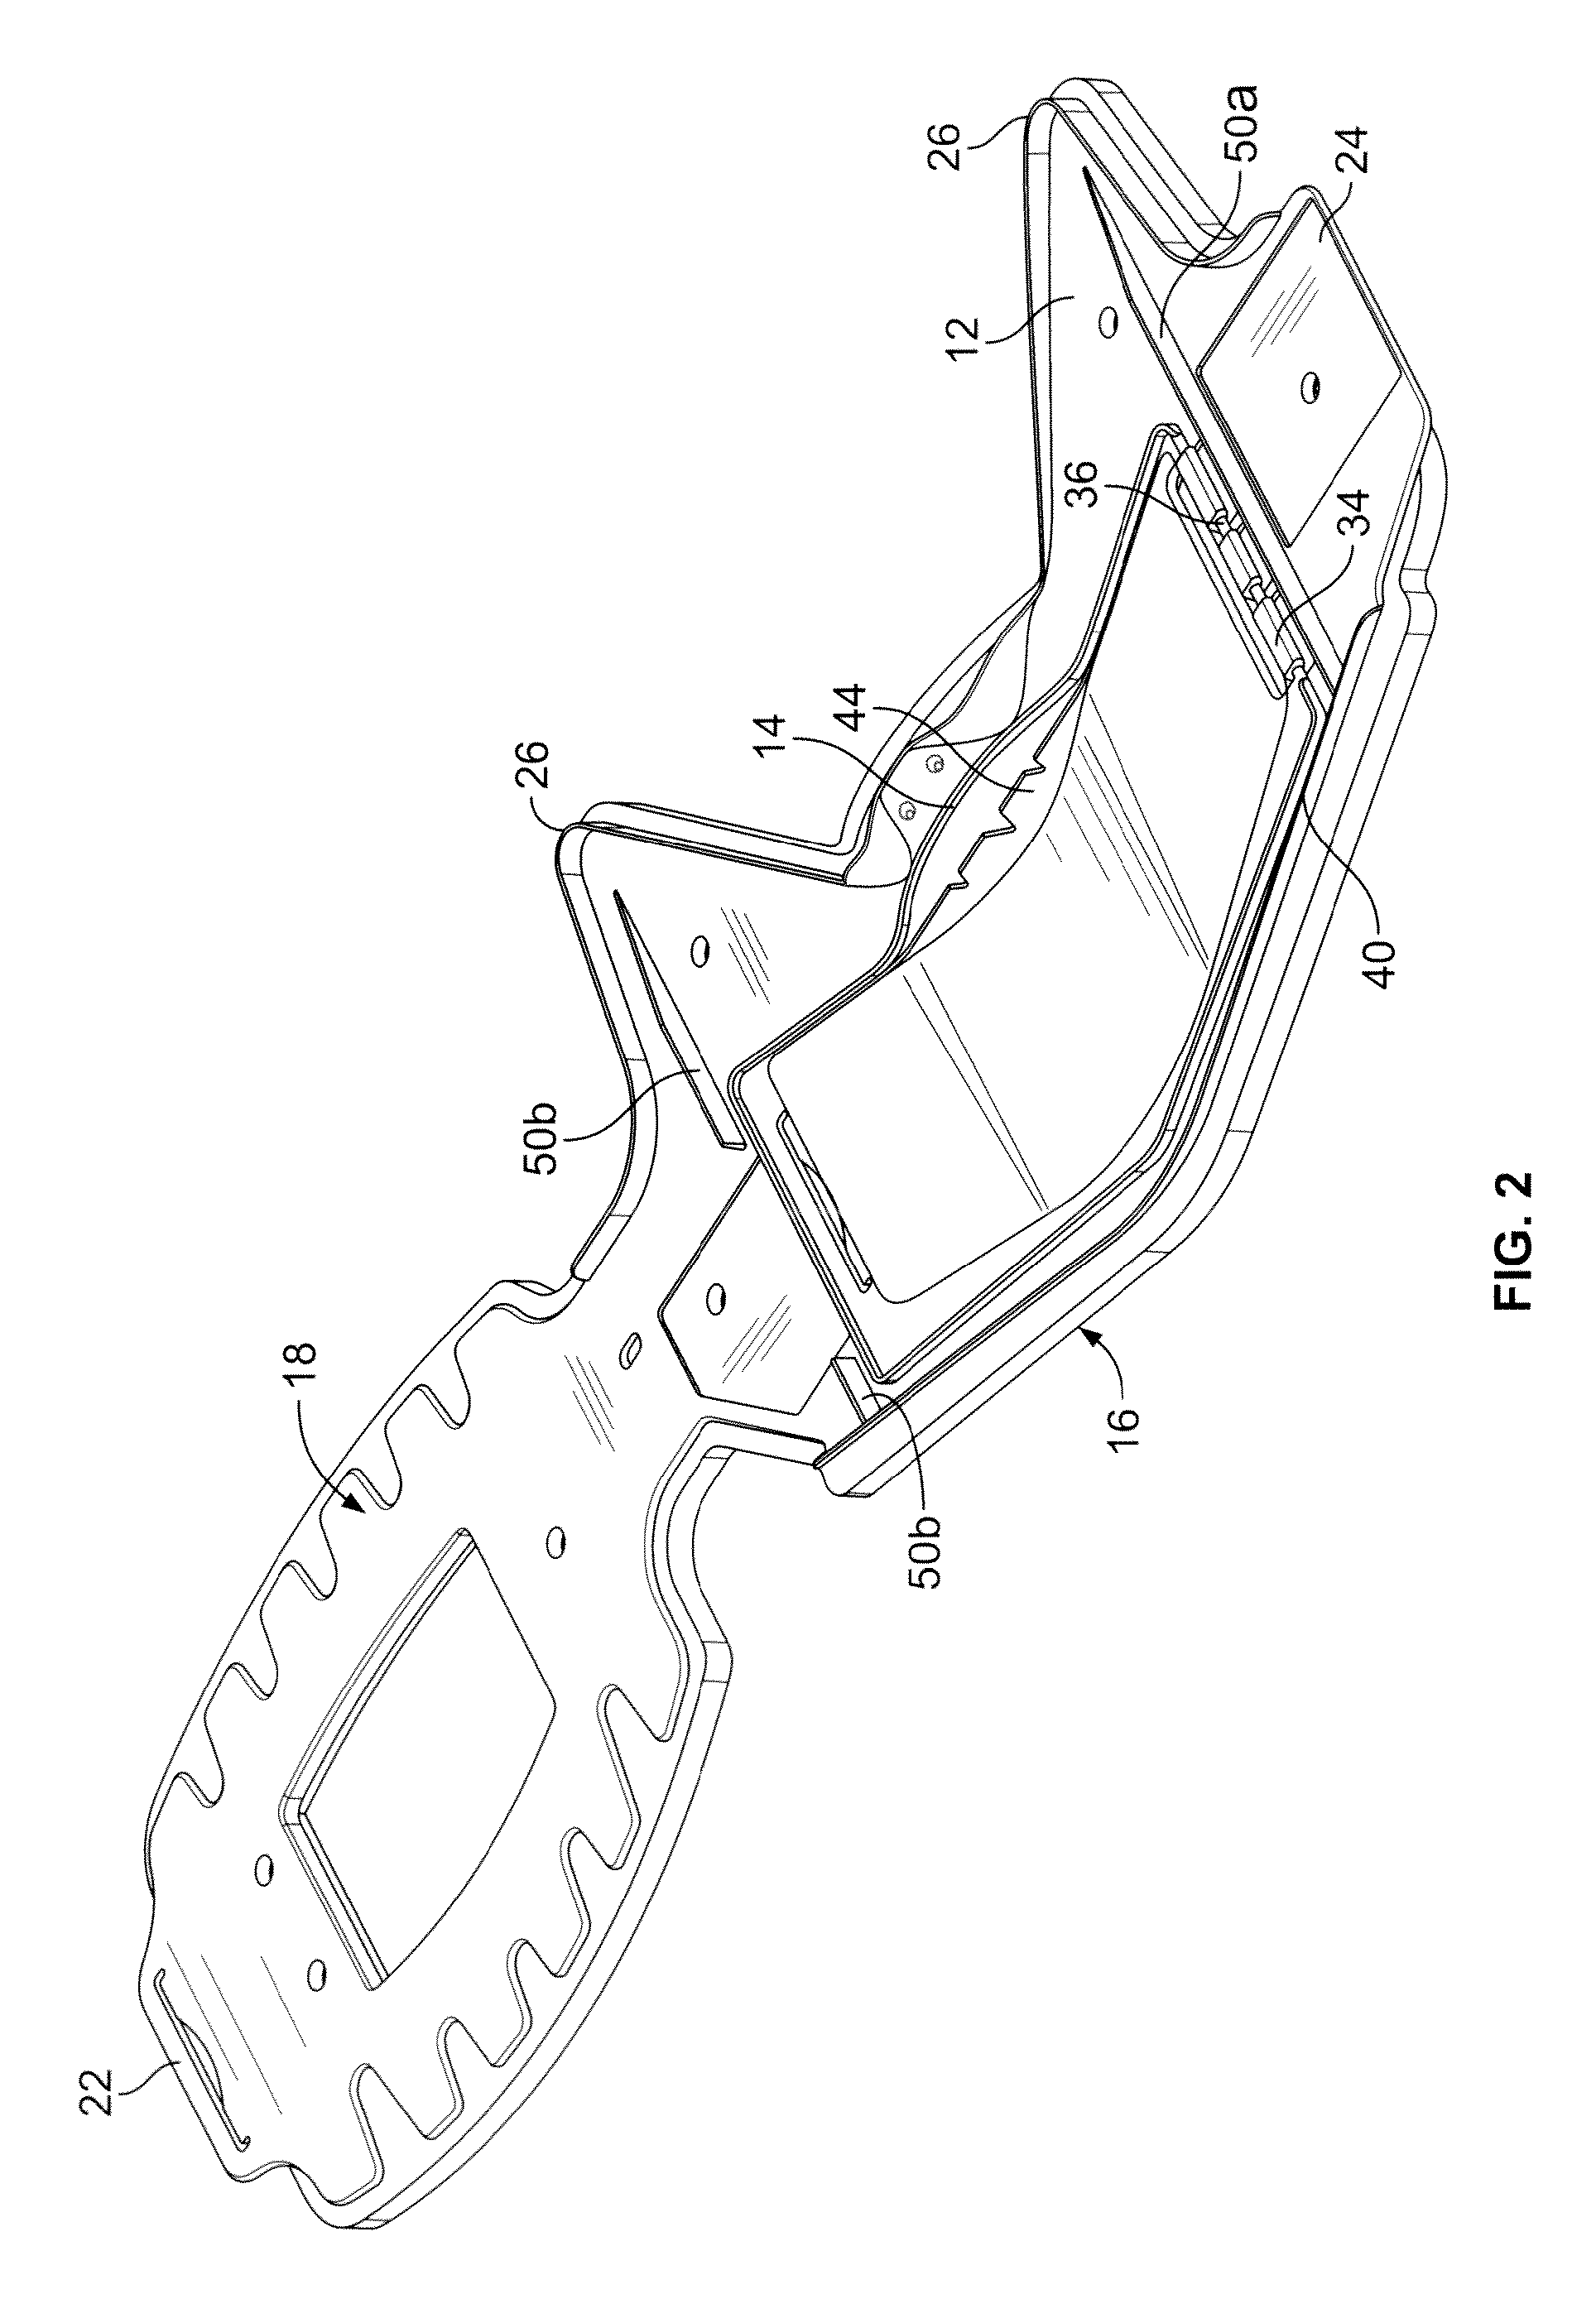 Arterial cooling elements for use with a cervical immobilization collar